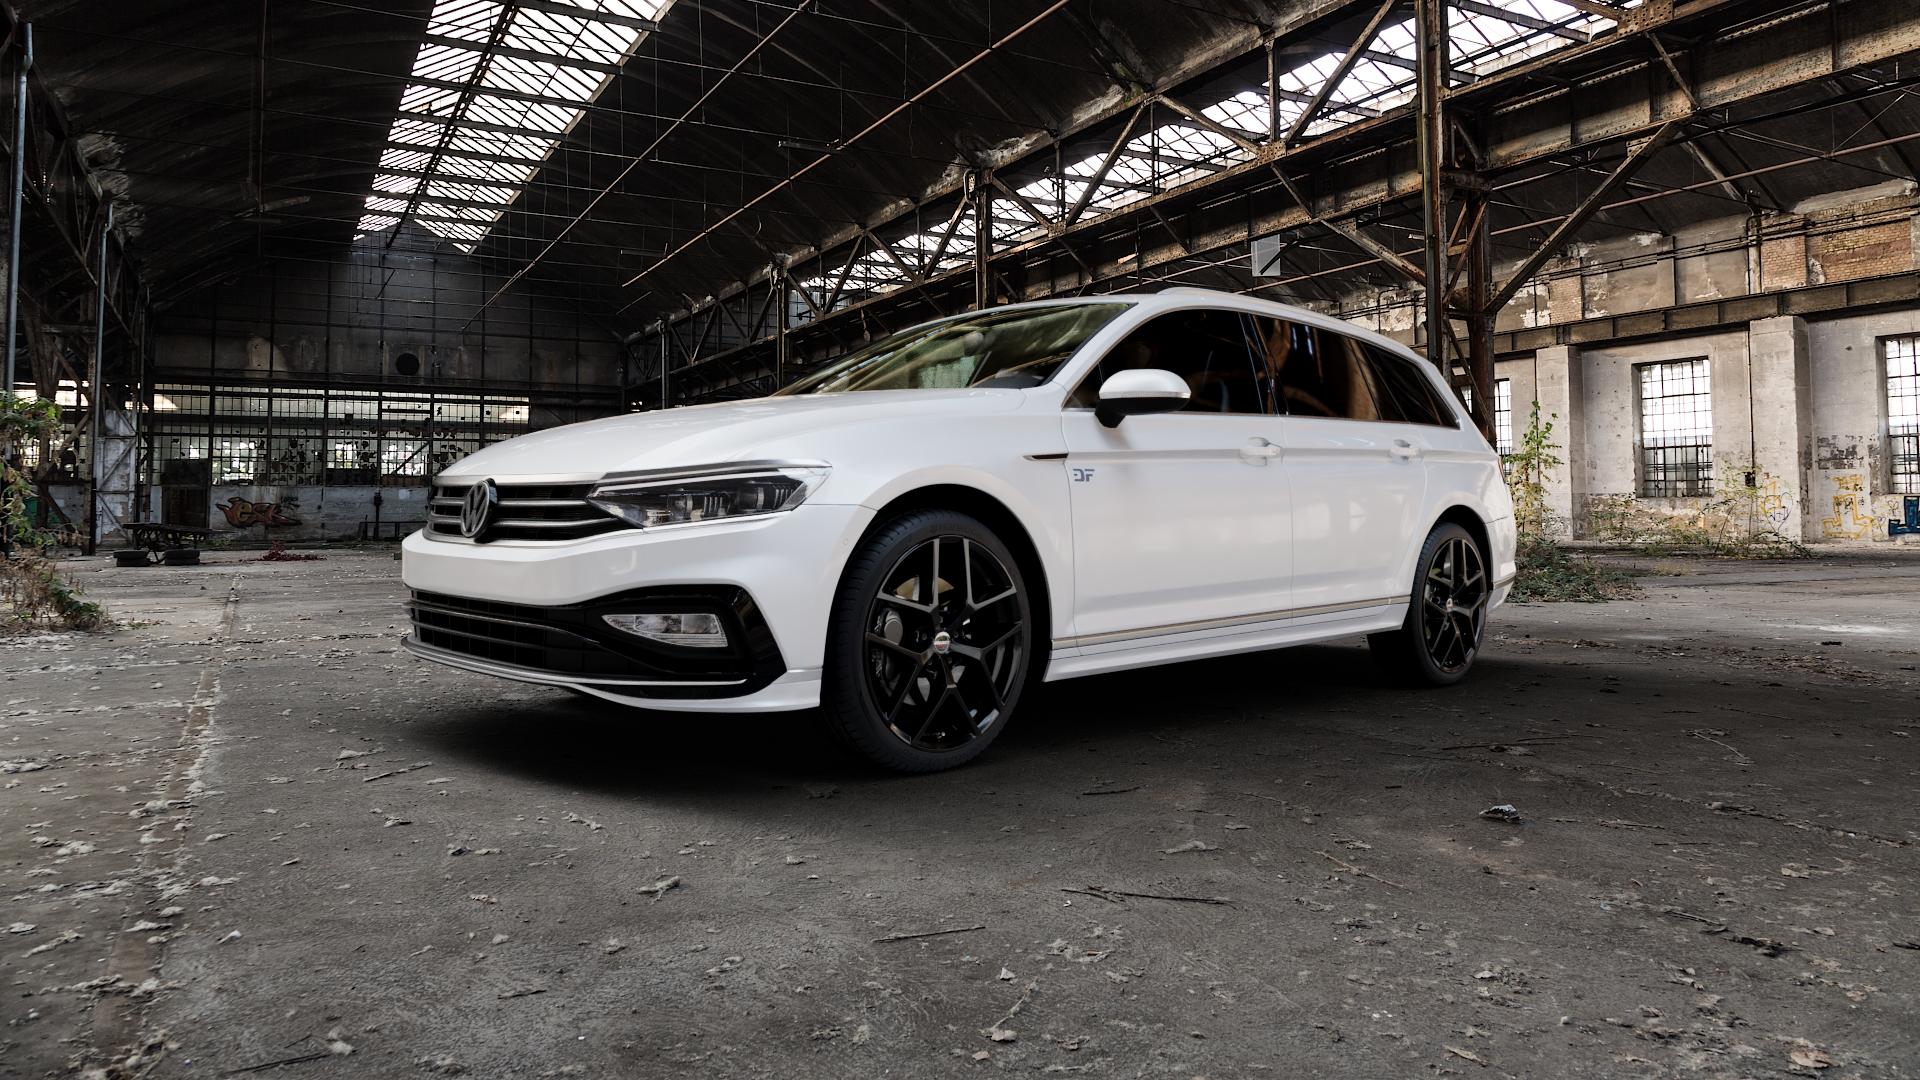 Volkswagen (VW) Passat 3C/B8 Variant Facelift 2,0l TDI 4Motion 176kW (239  hp) Wheels and Tyre Packages | velonity.com